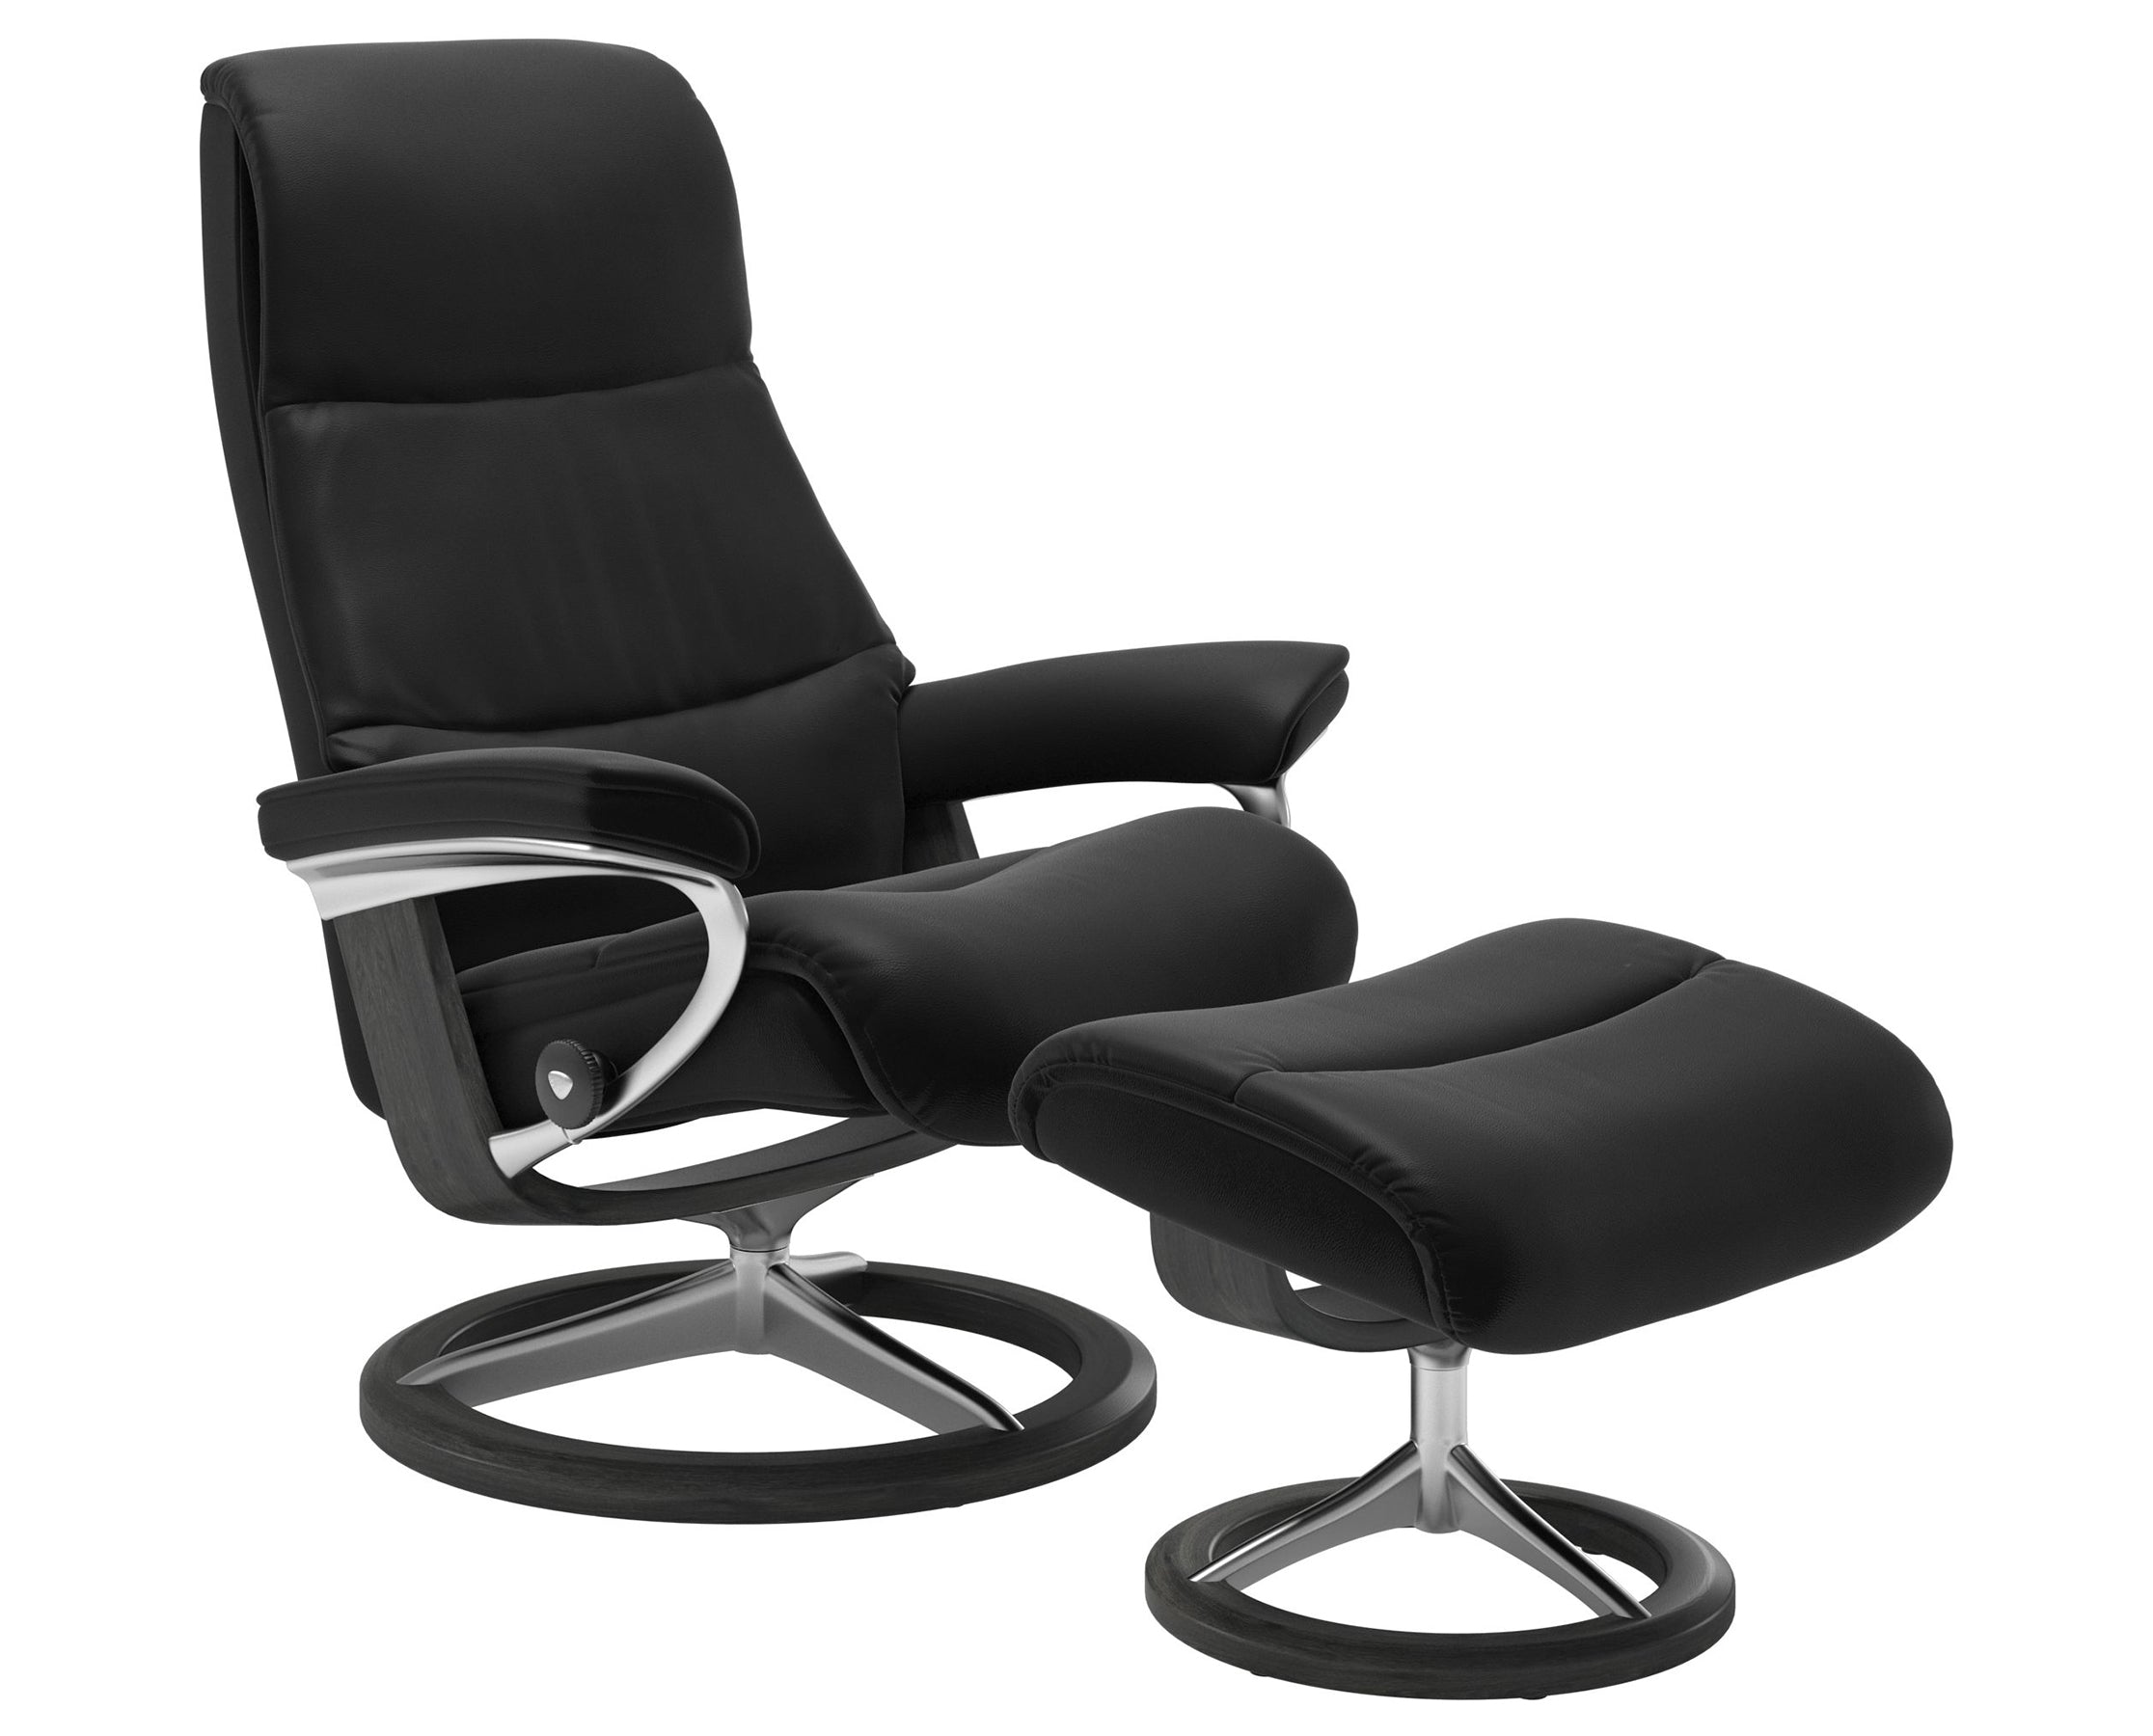 Paloma Leather Black S/M/L and Grey Base | Stressless View Signature Recliner | Valley Ridge Furniture